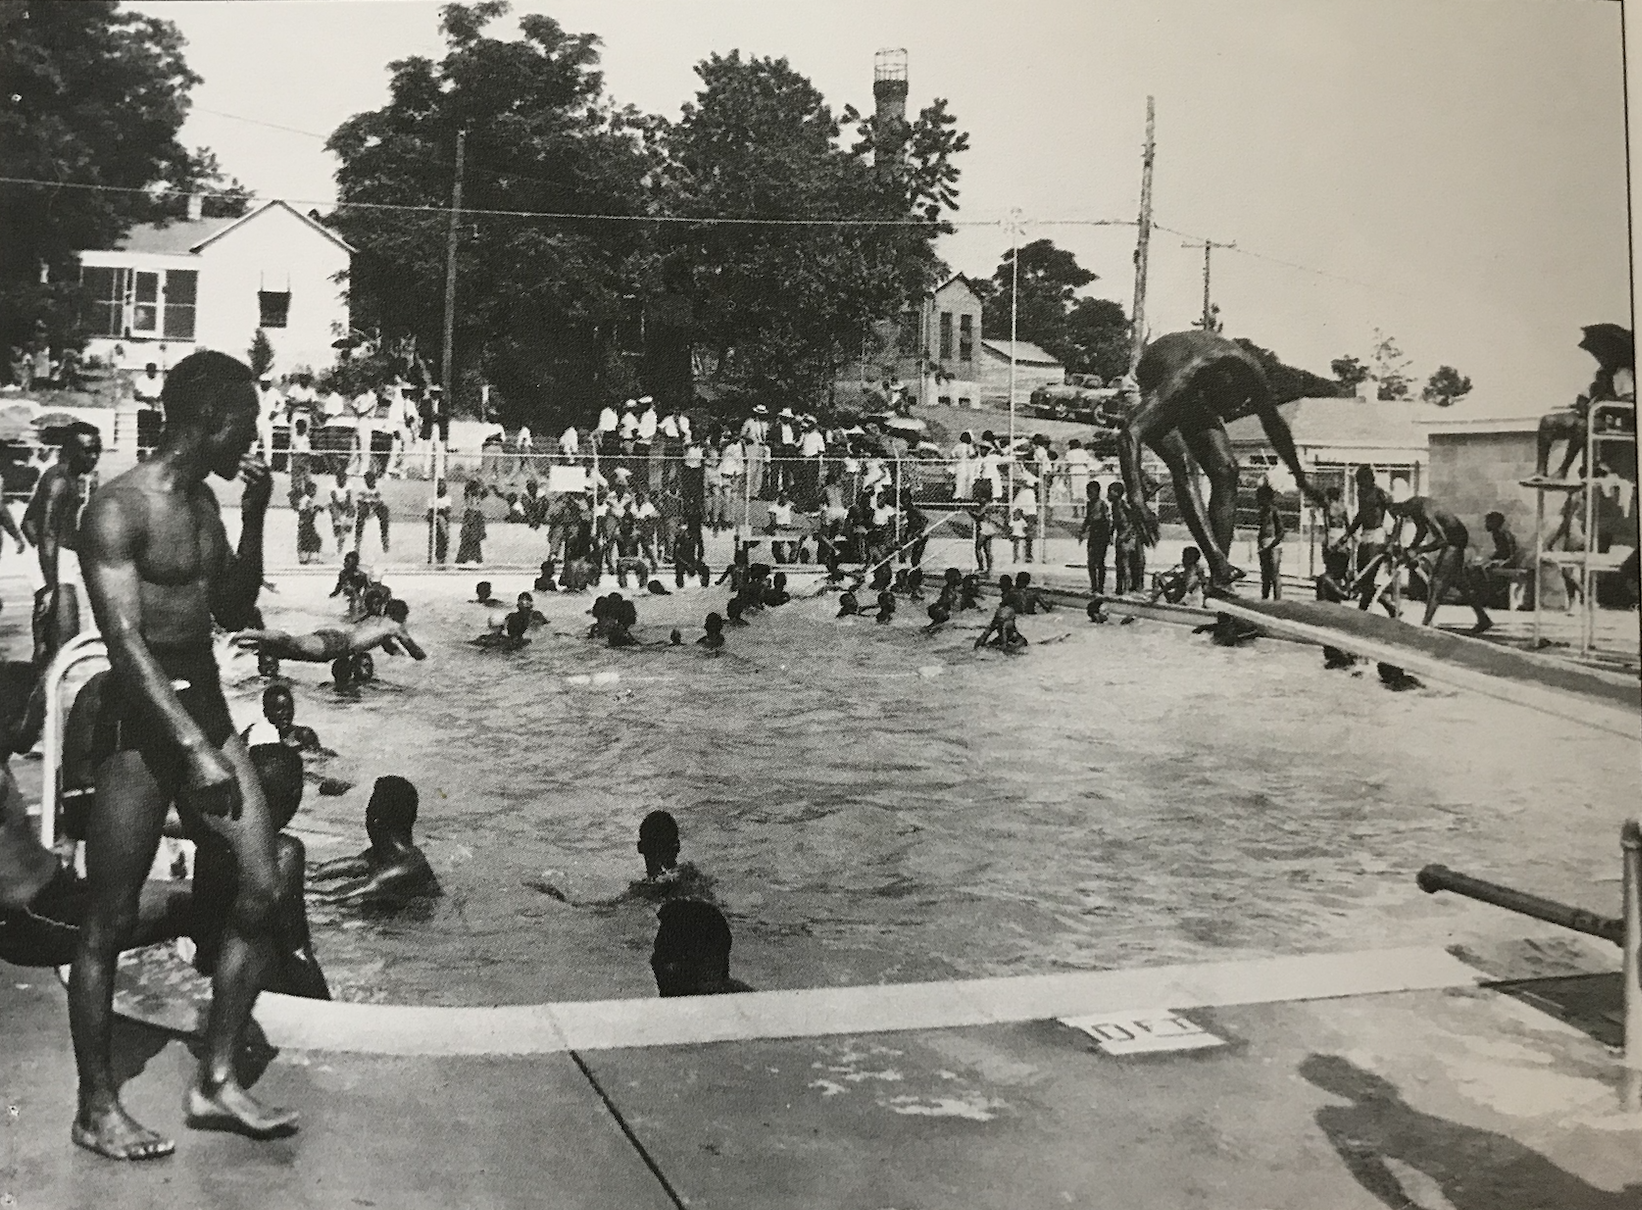 A black and white photo of the Randall Street Pool with dozens of people swimming and gathering around the pool,